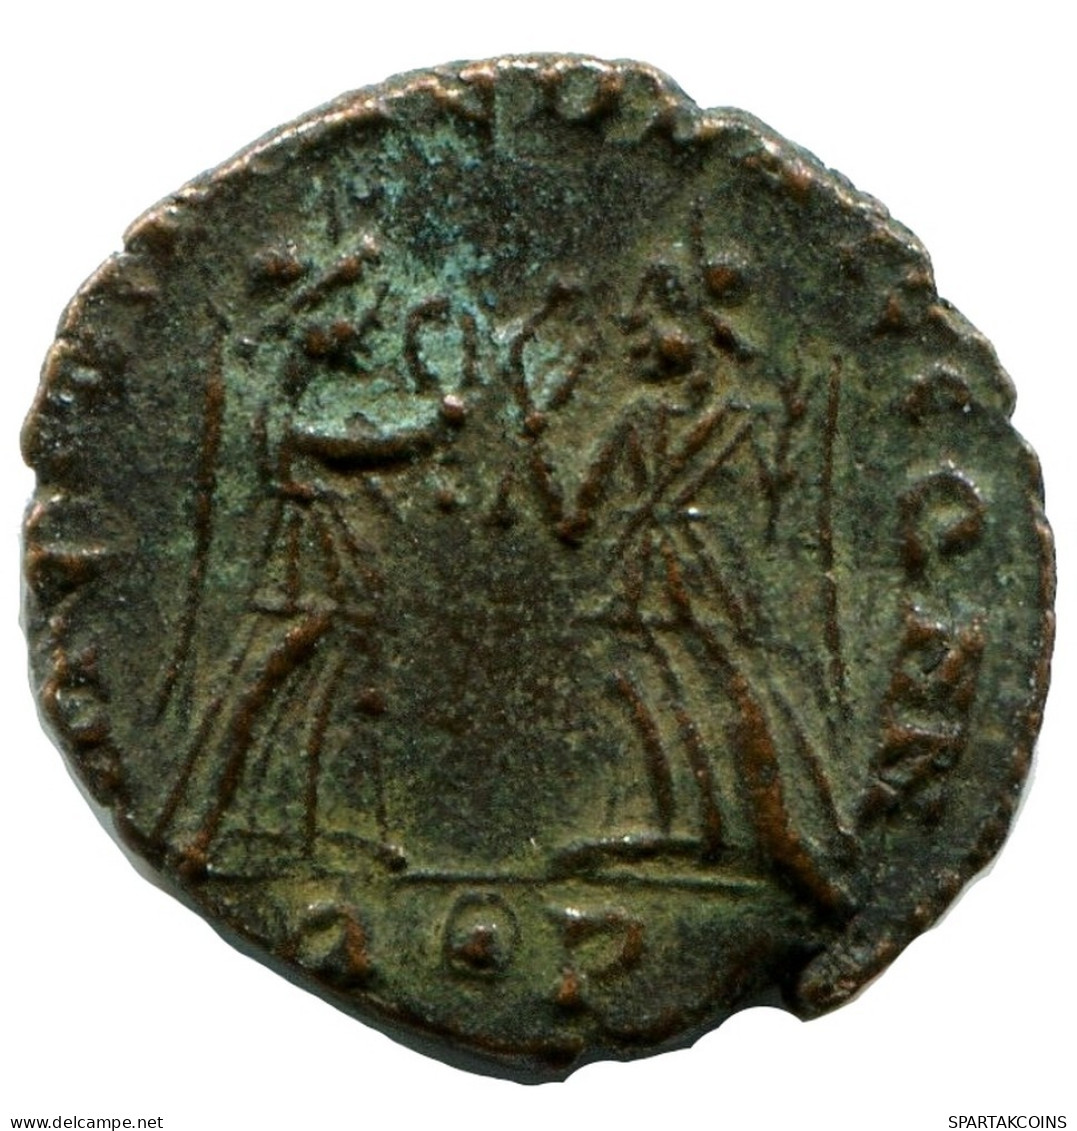 CONSTANS MINTED IN ROME ITALY FROM THE ROYAL ONTARIO MUSEUM #ANC11537.14.U.A - El Imperio Christiano (307 / 363)